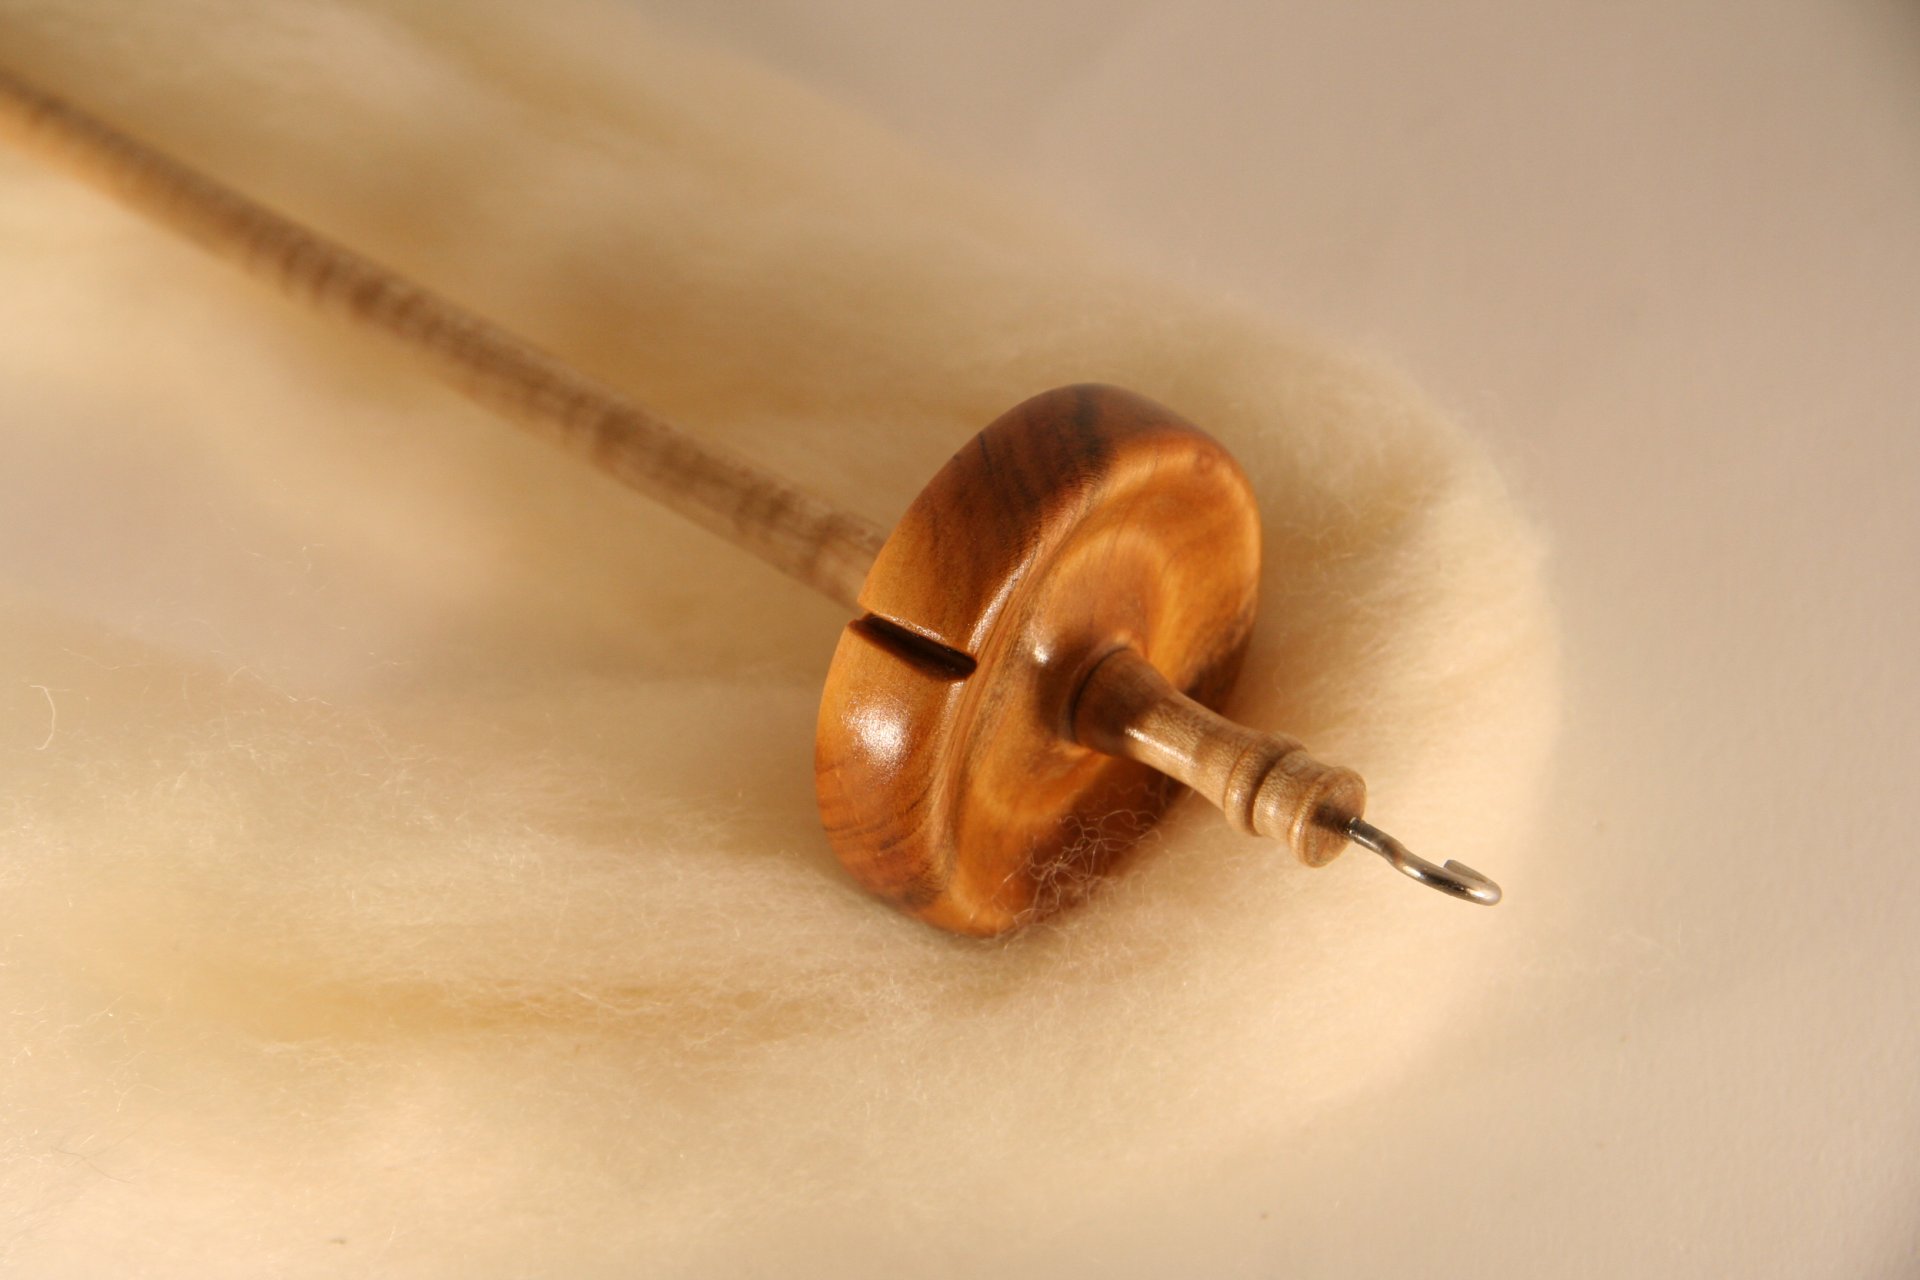 Drop spindle with curly maple and cherry